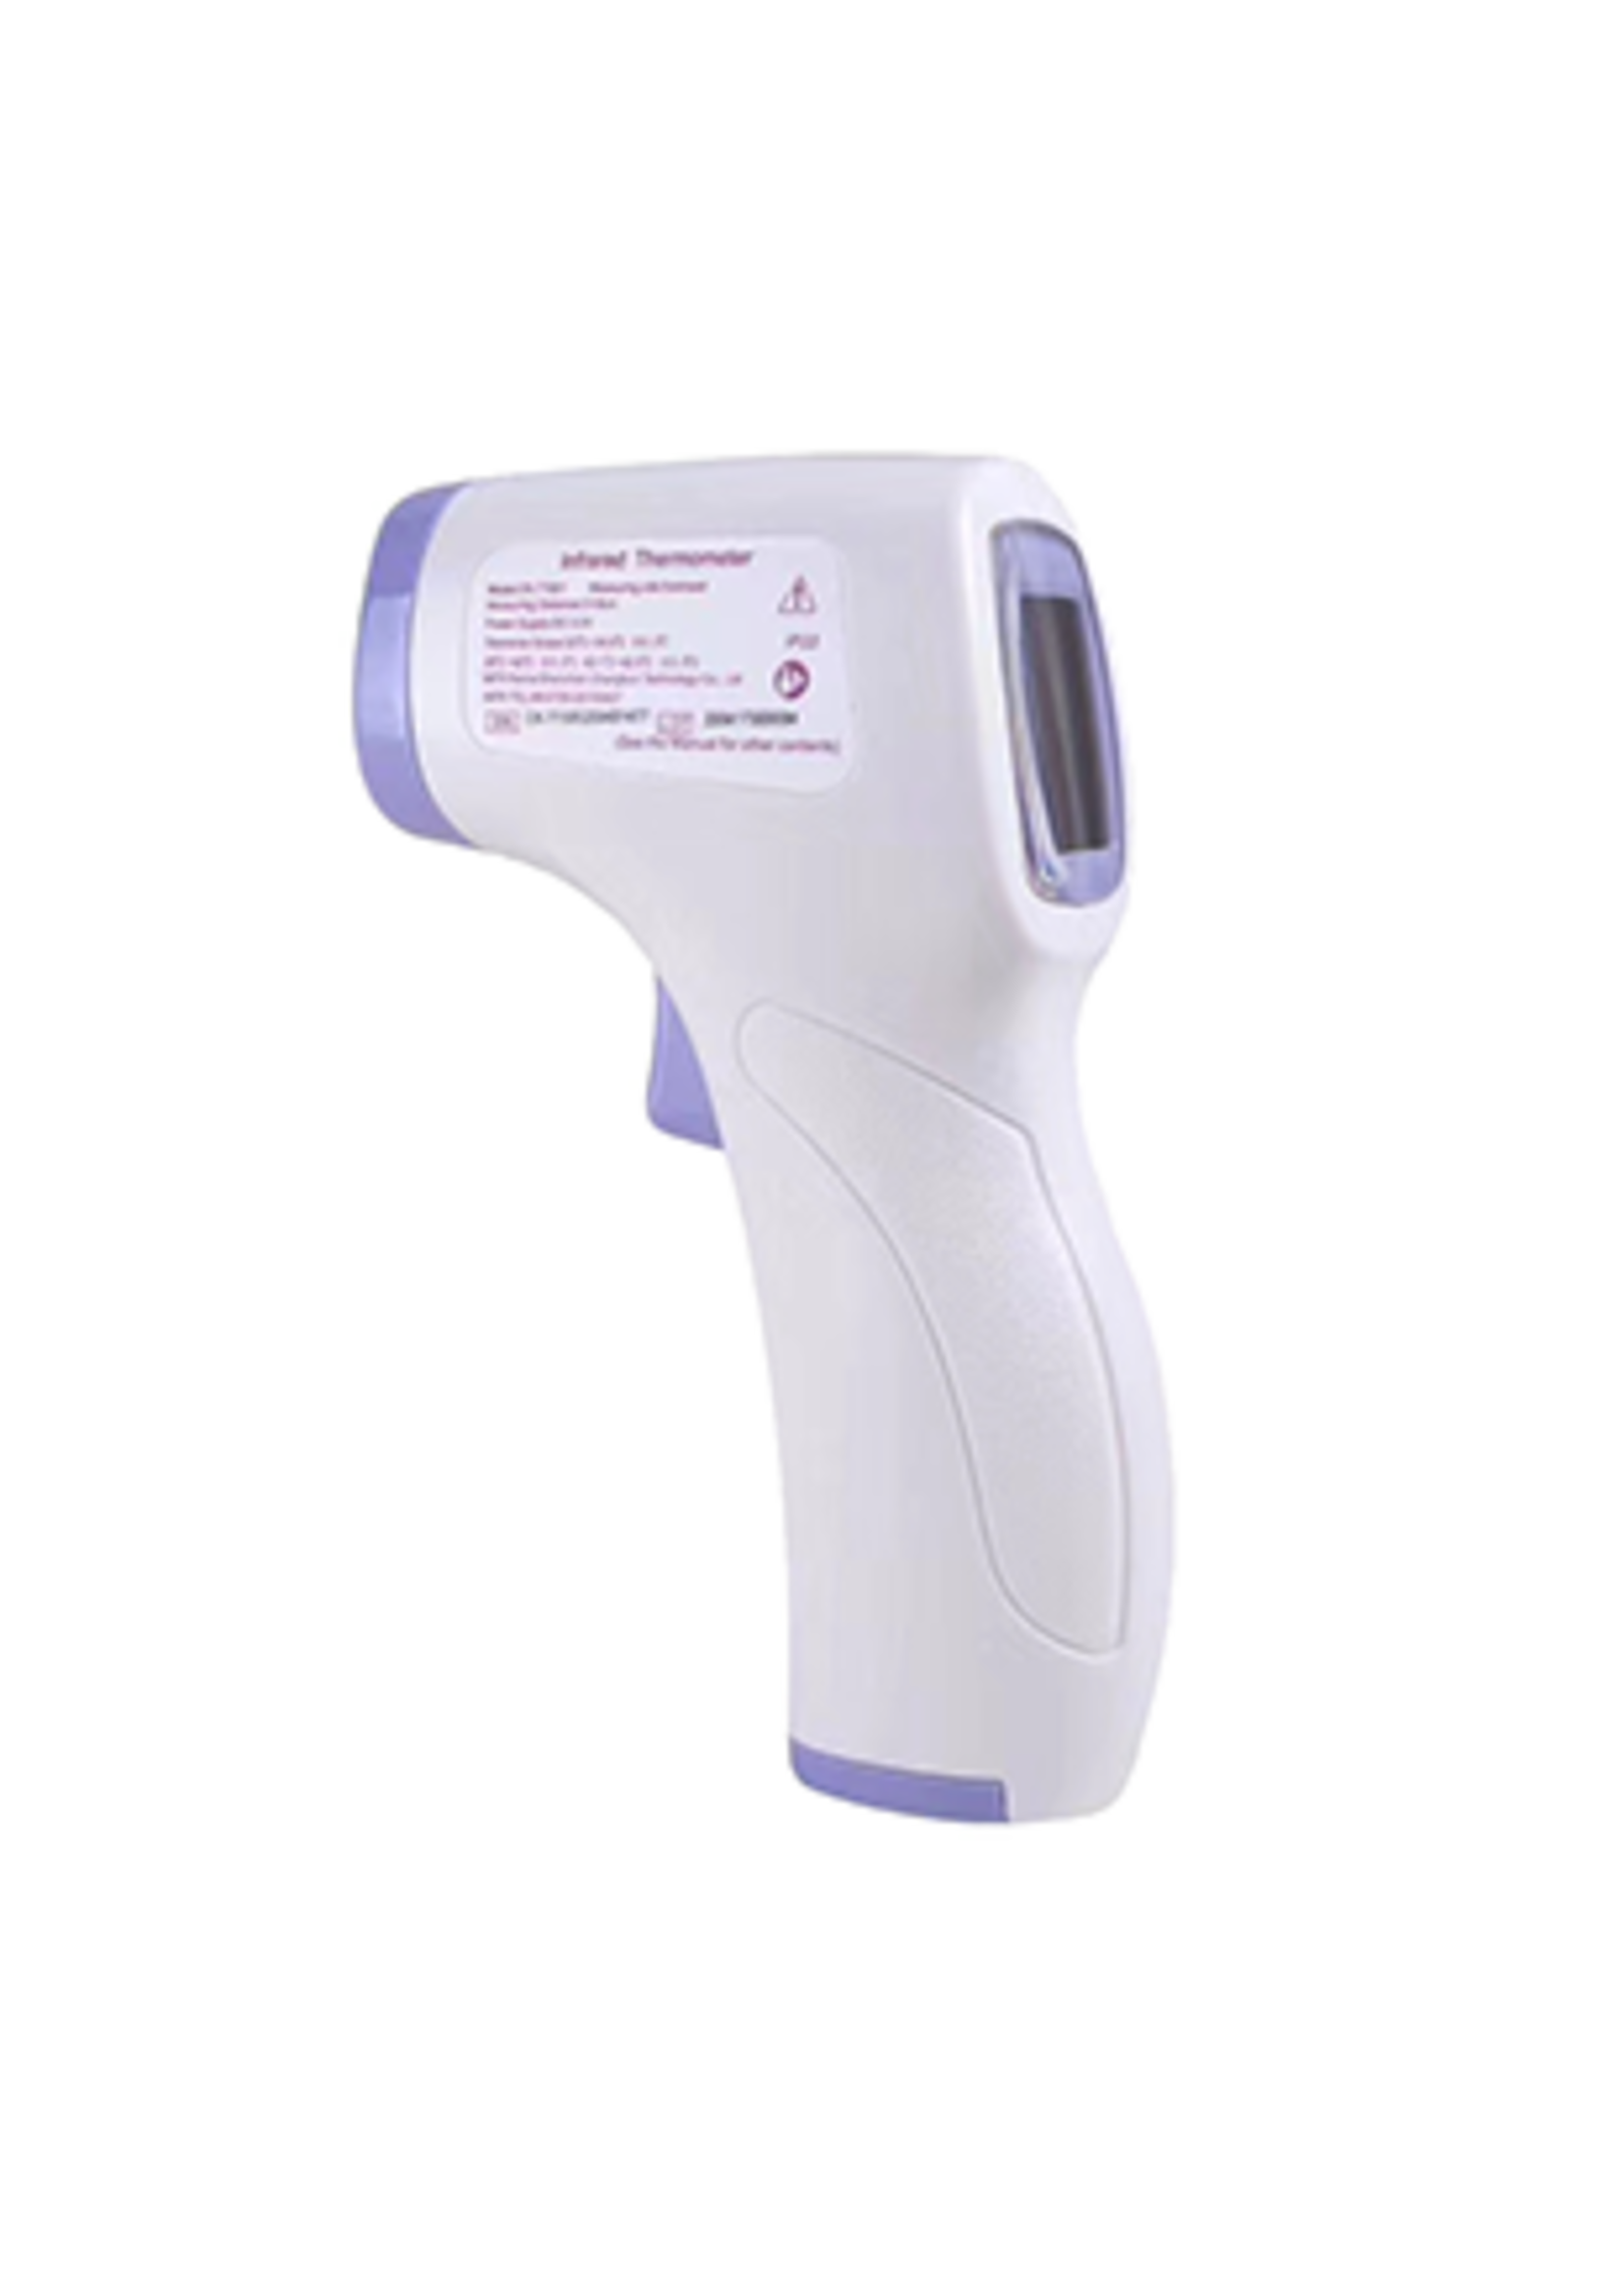 Quick Temp Infrared Thermometer - NDC# 50632-0007-59